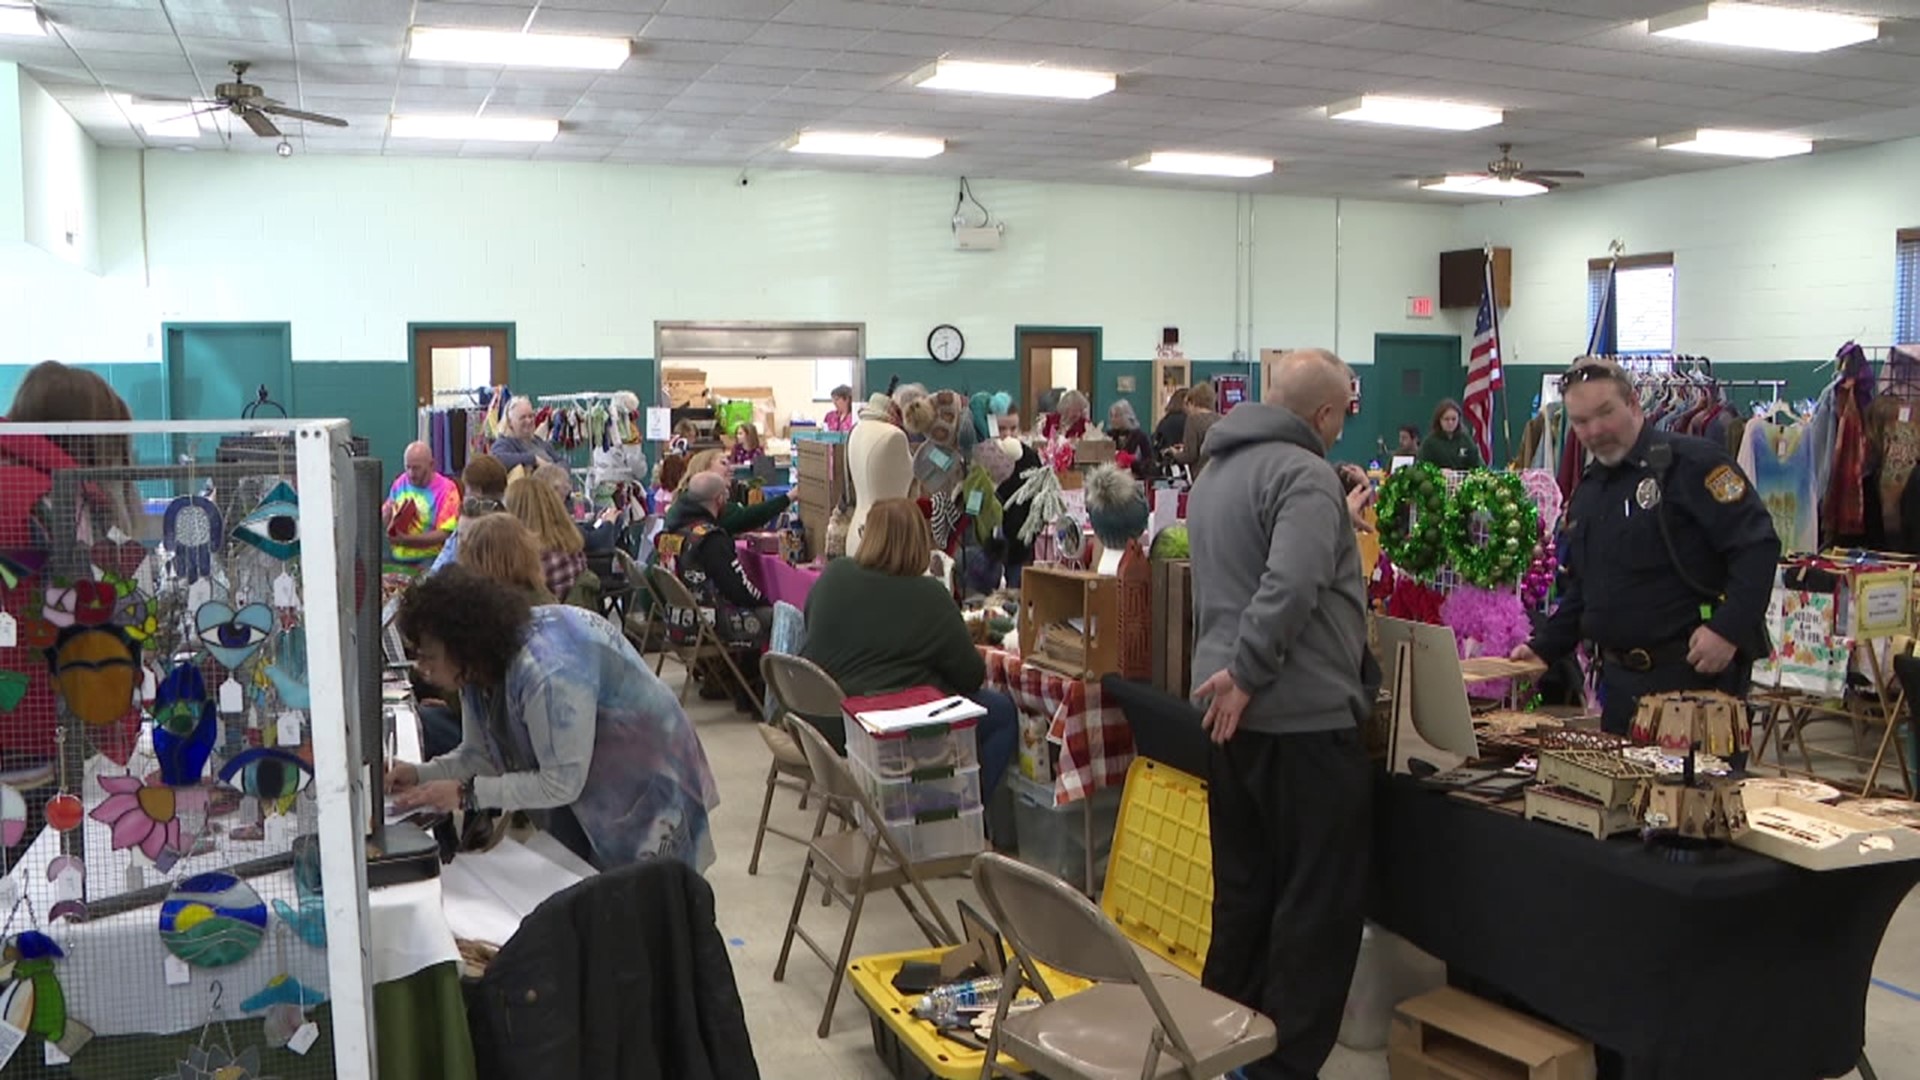 The Harding Recreation Committee hosted a Winterfest event at the Exeter Township Municipal Building.